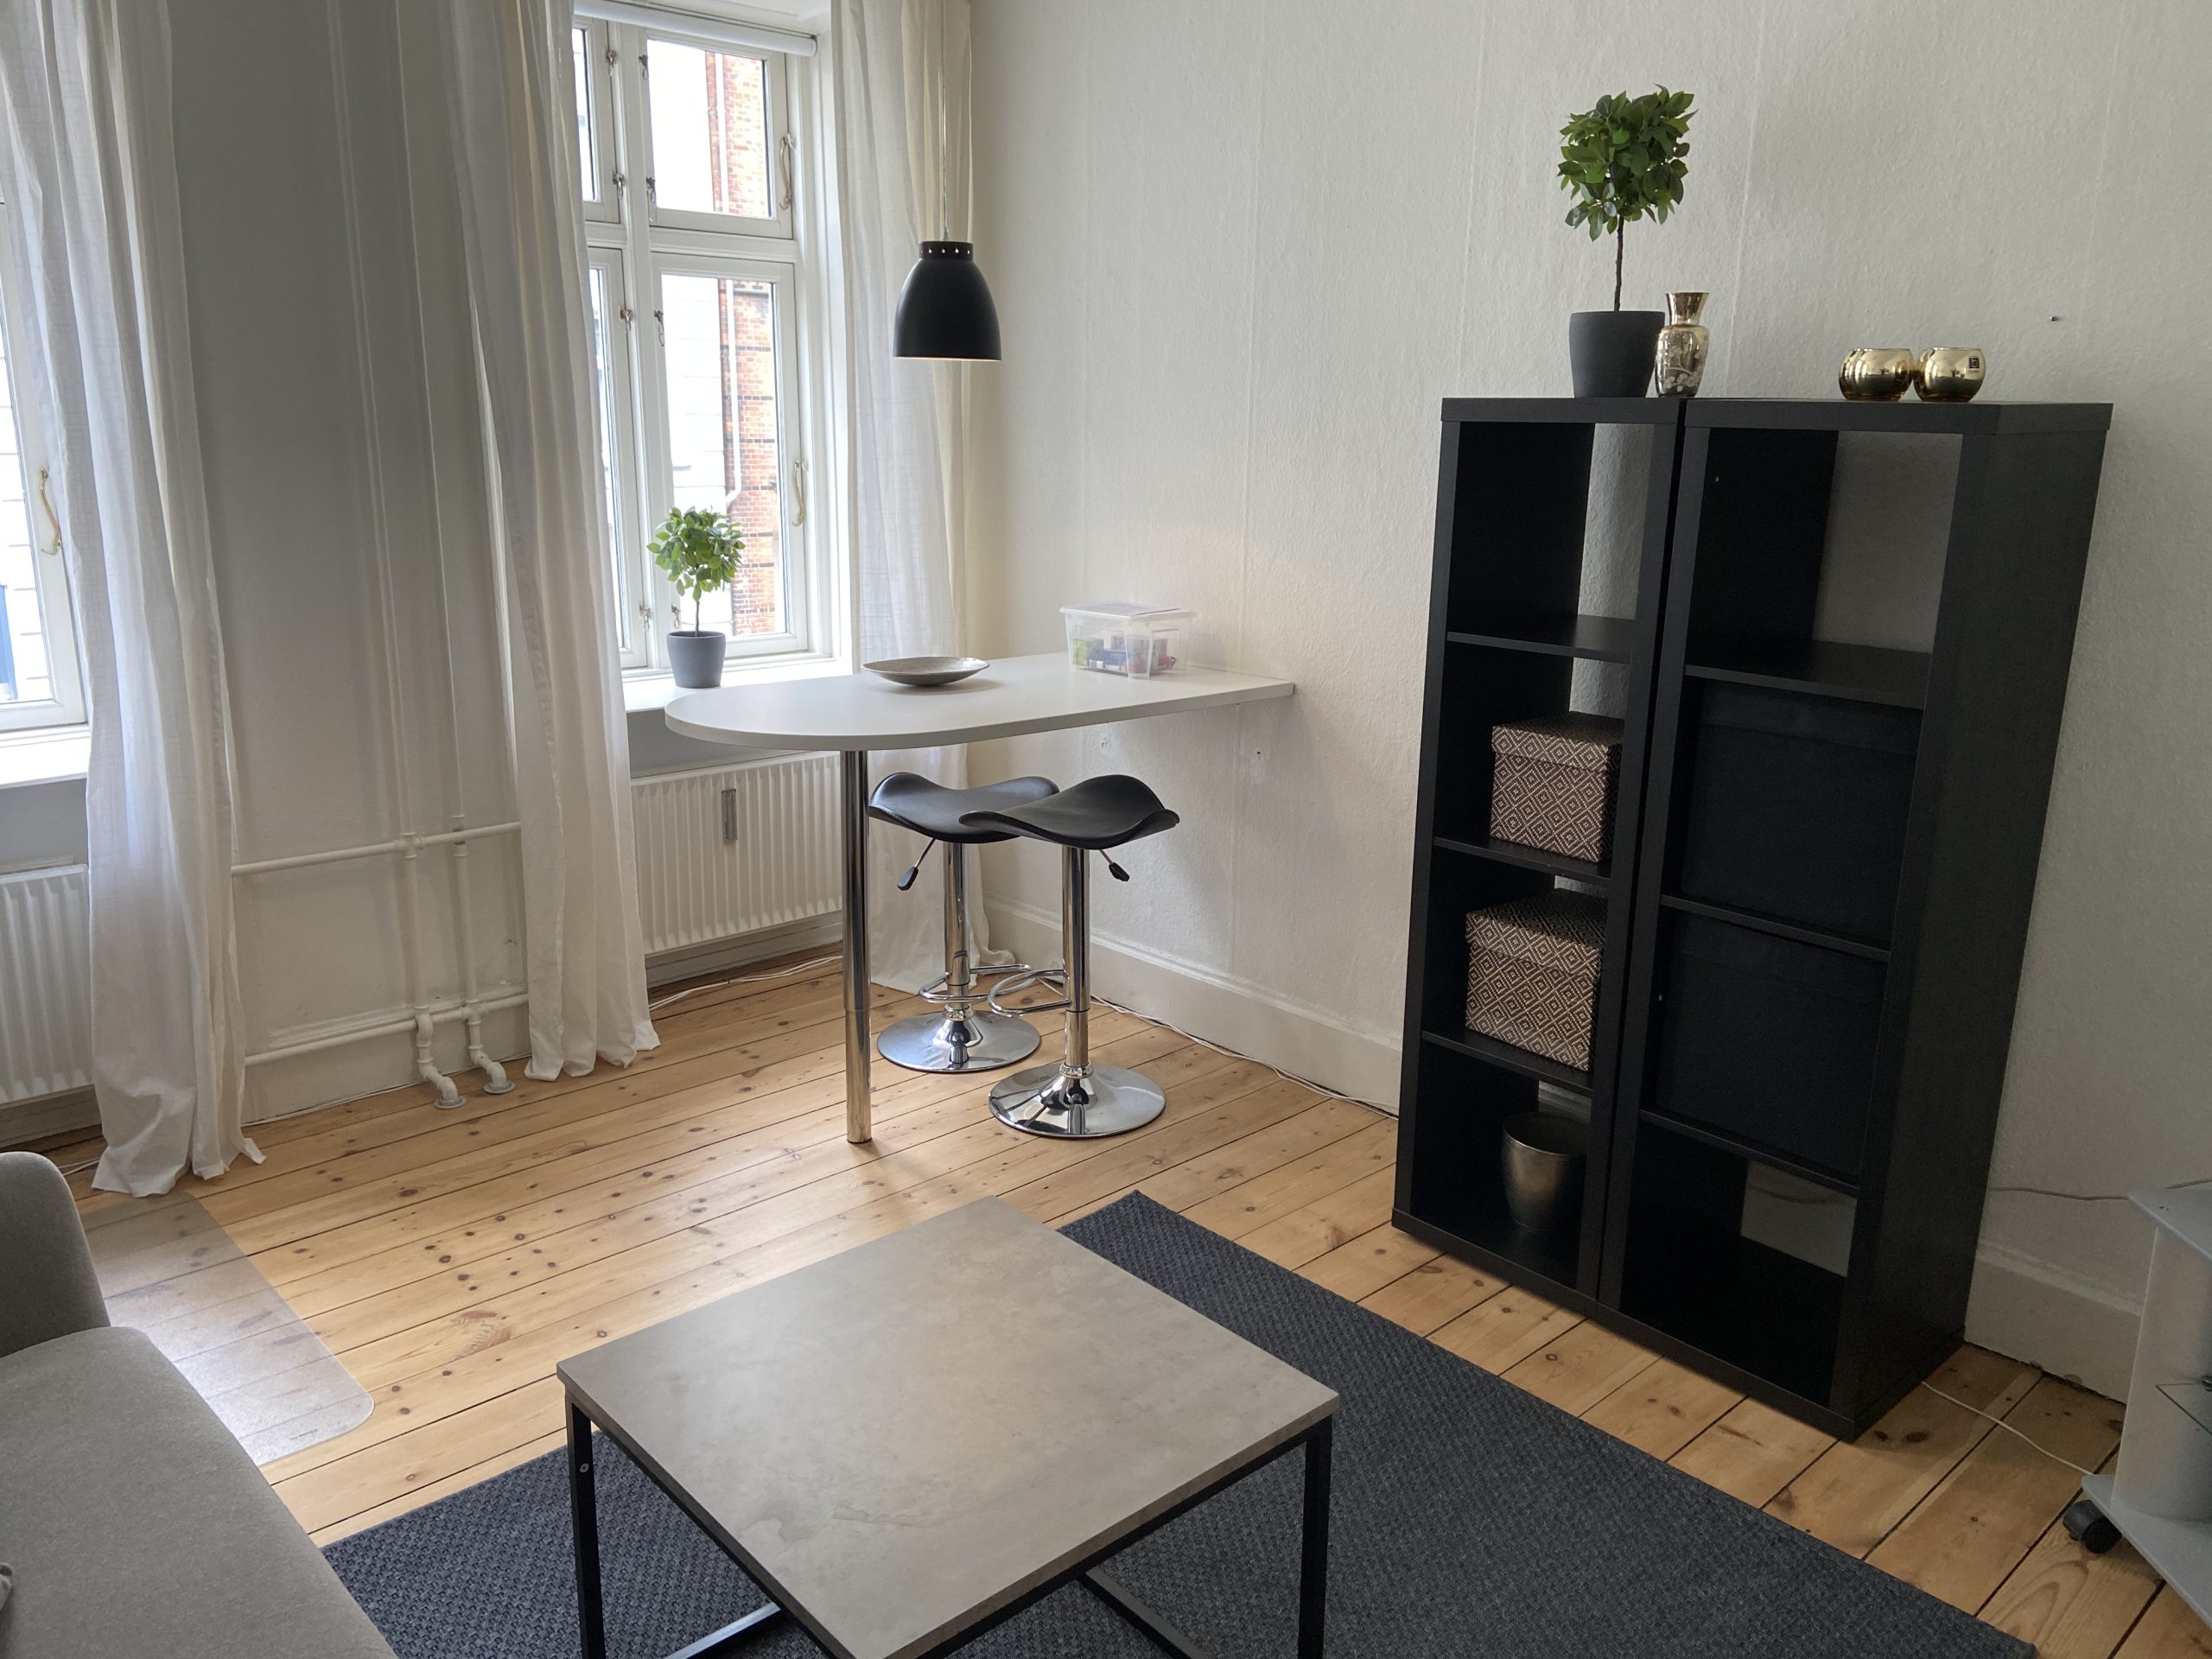 1723 – 2 room apartment in central Østersbro